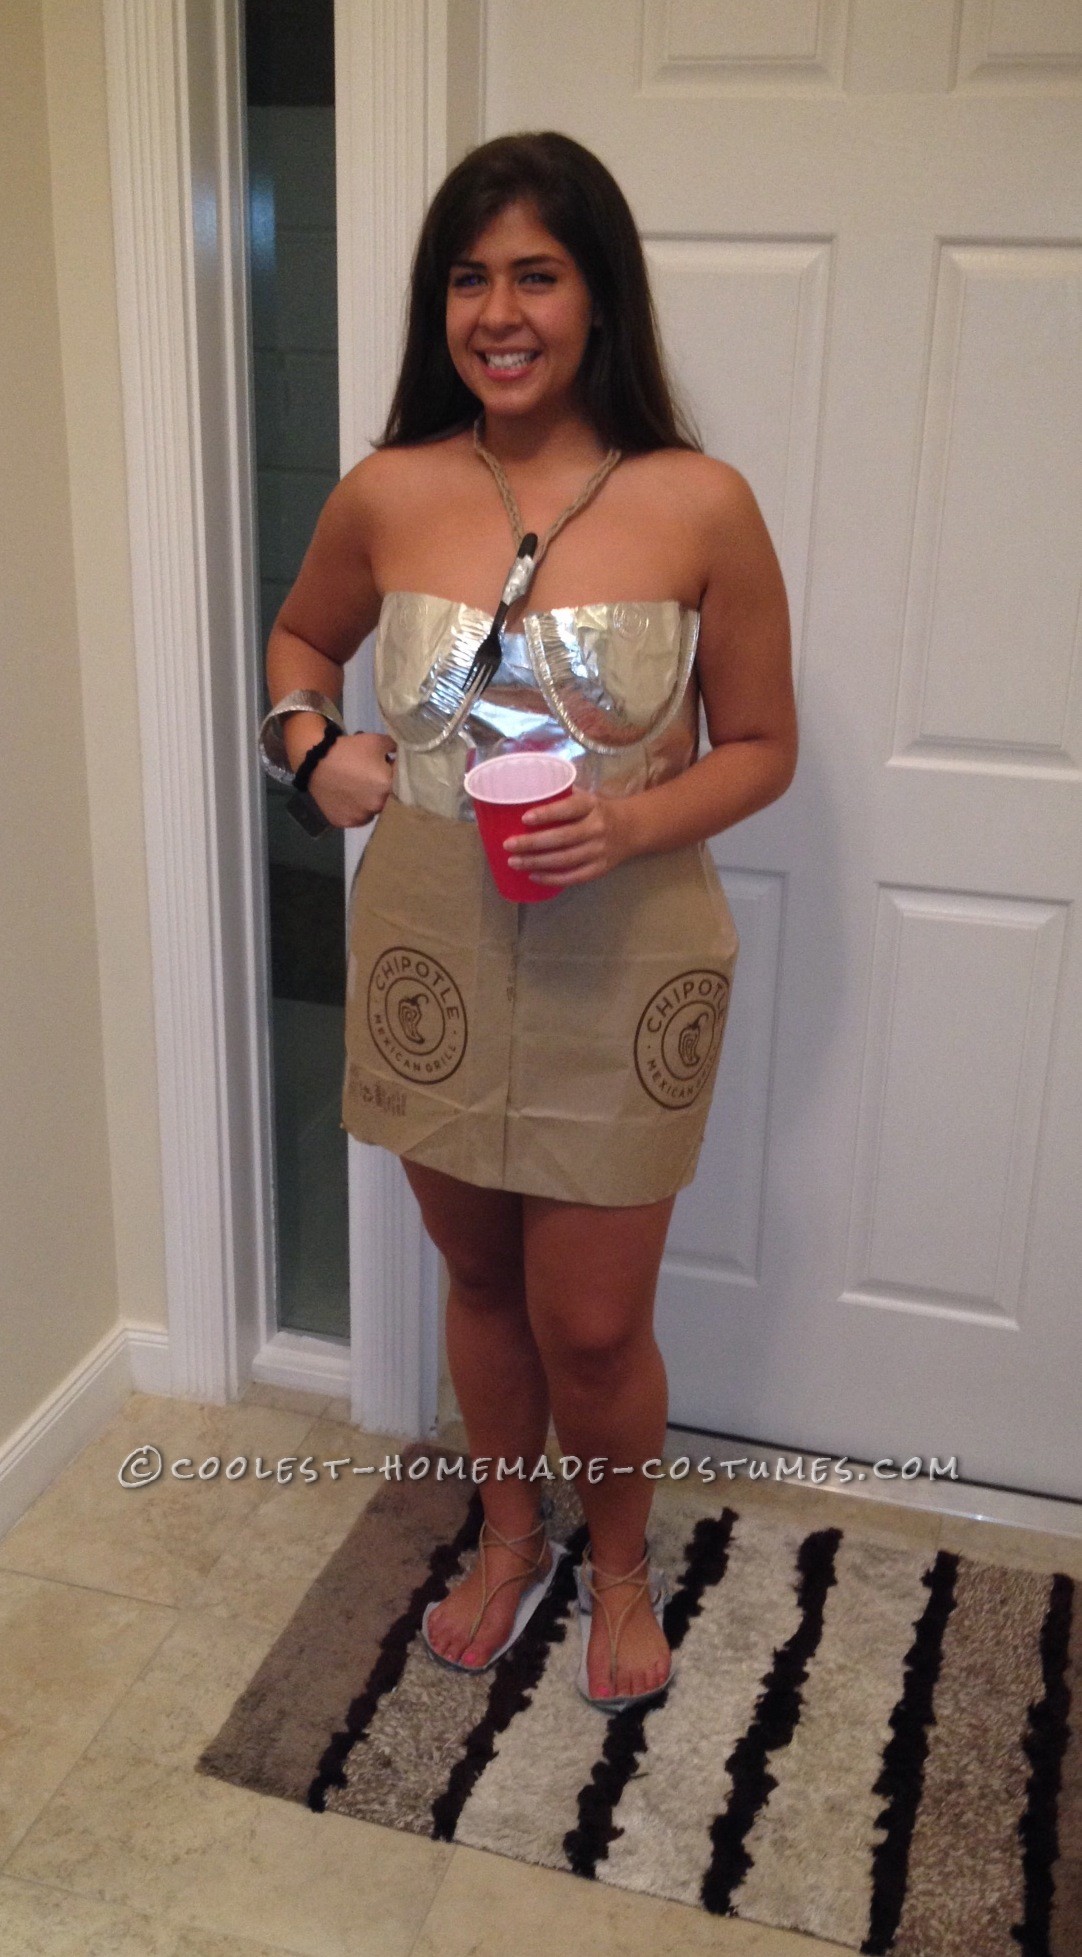 Anything But Clothes (ABC) Party Costume Idea: Chipotle. 